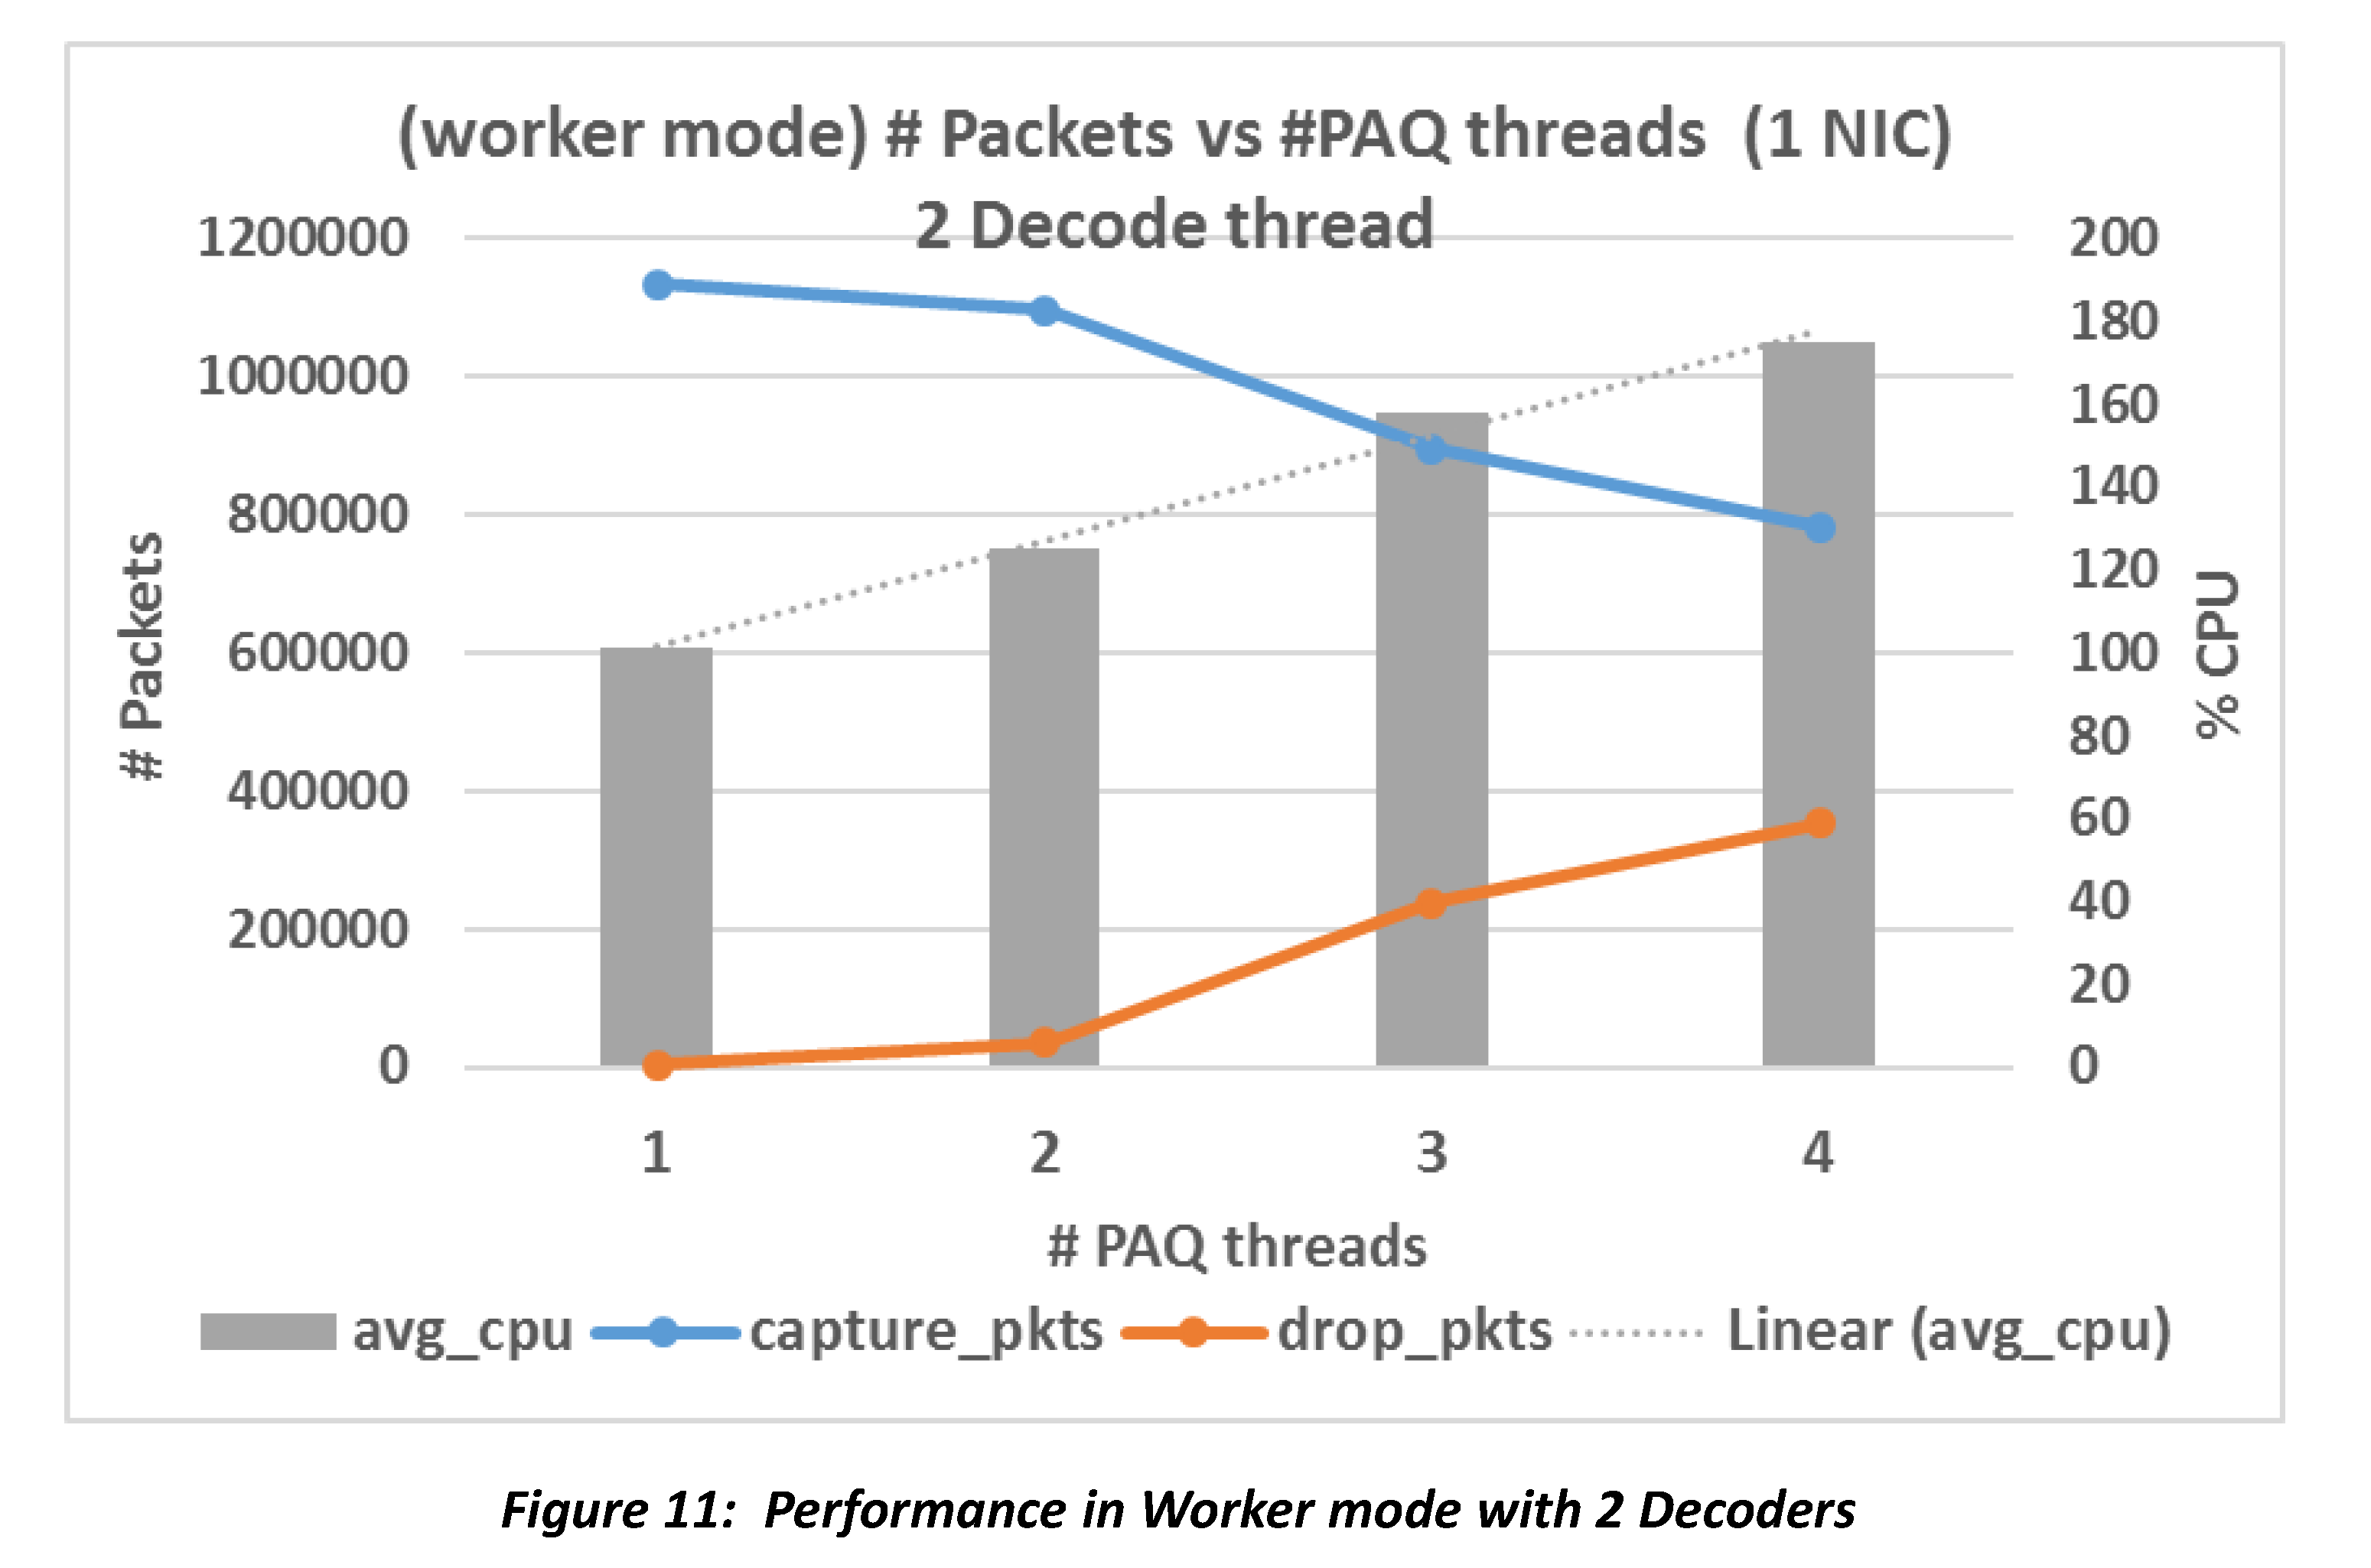 workers mode result with 2 decoders and 1-4 PAQs